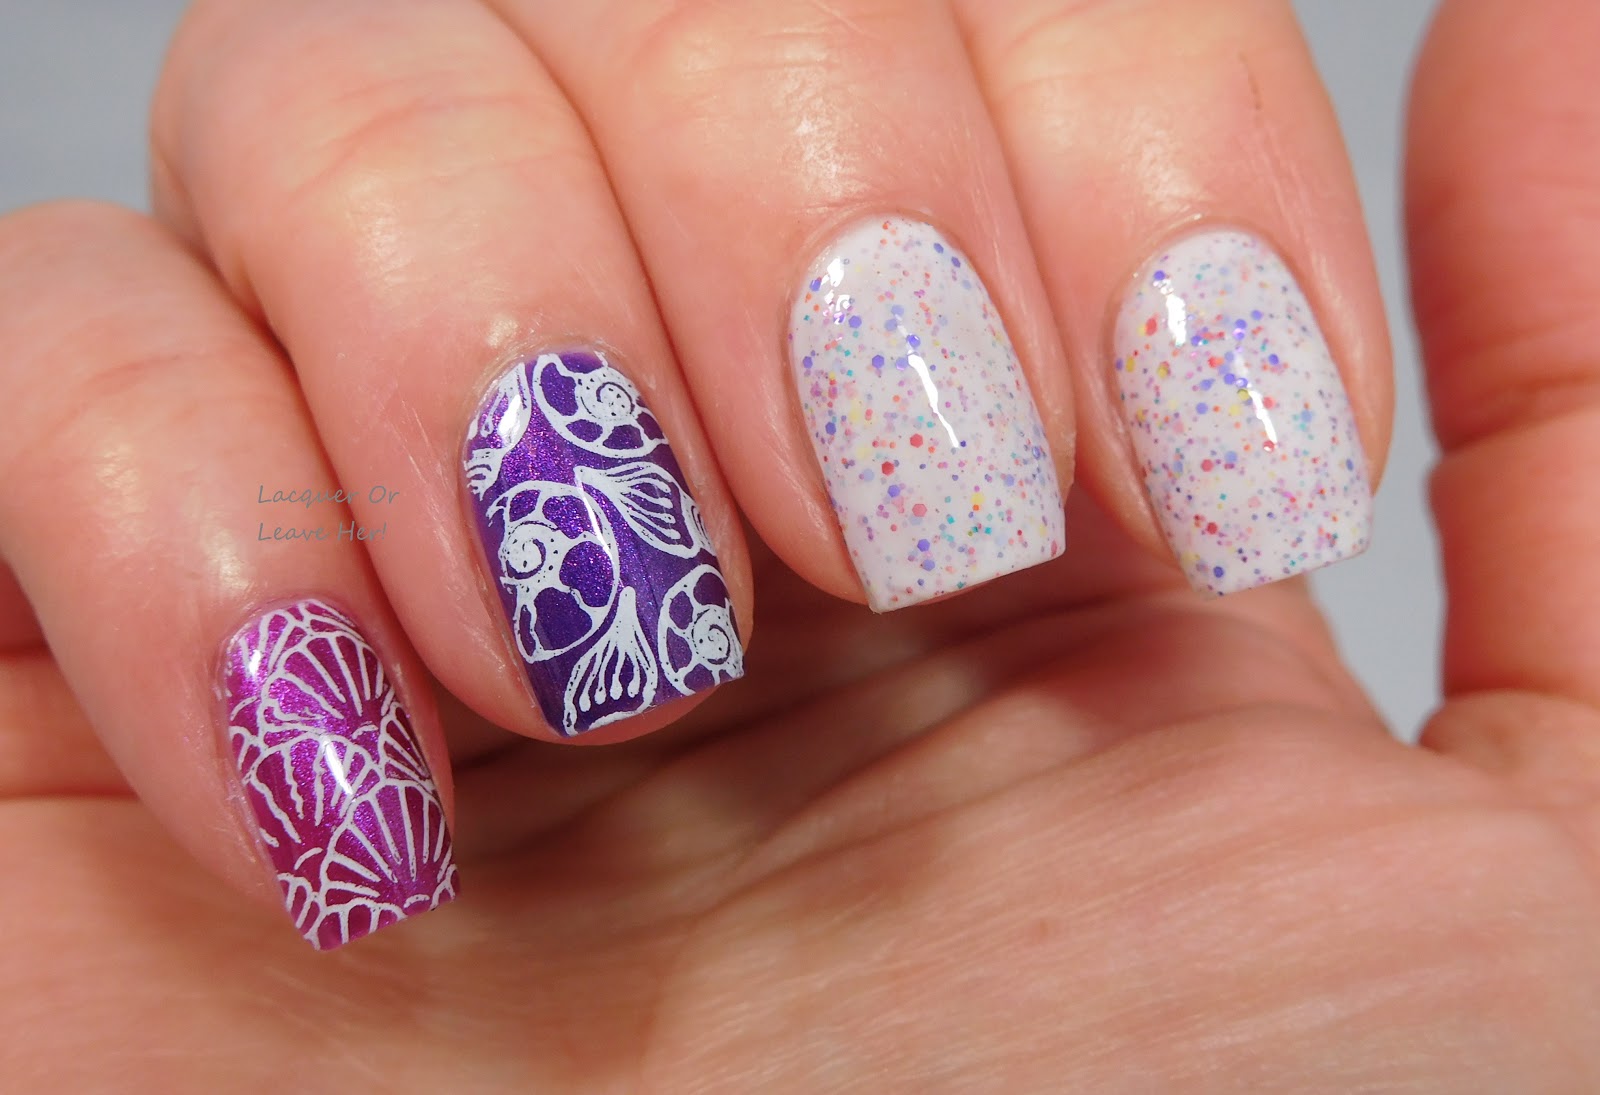 Lacquer or Leave Her!: Review: Lina Nail Art Supplies Born To Sail 01 ...